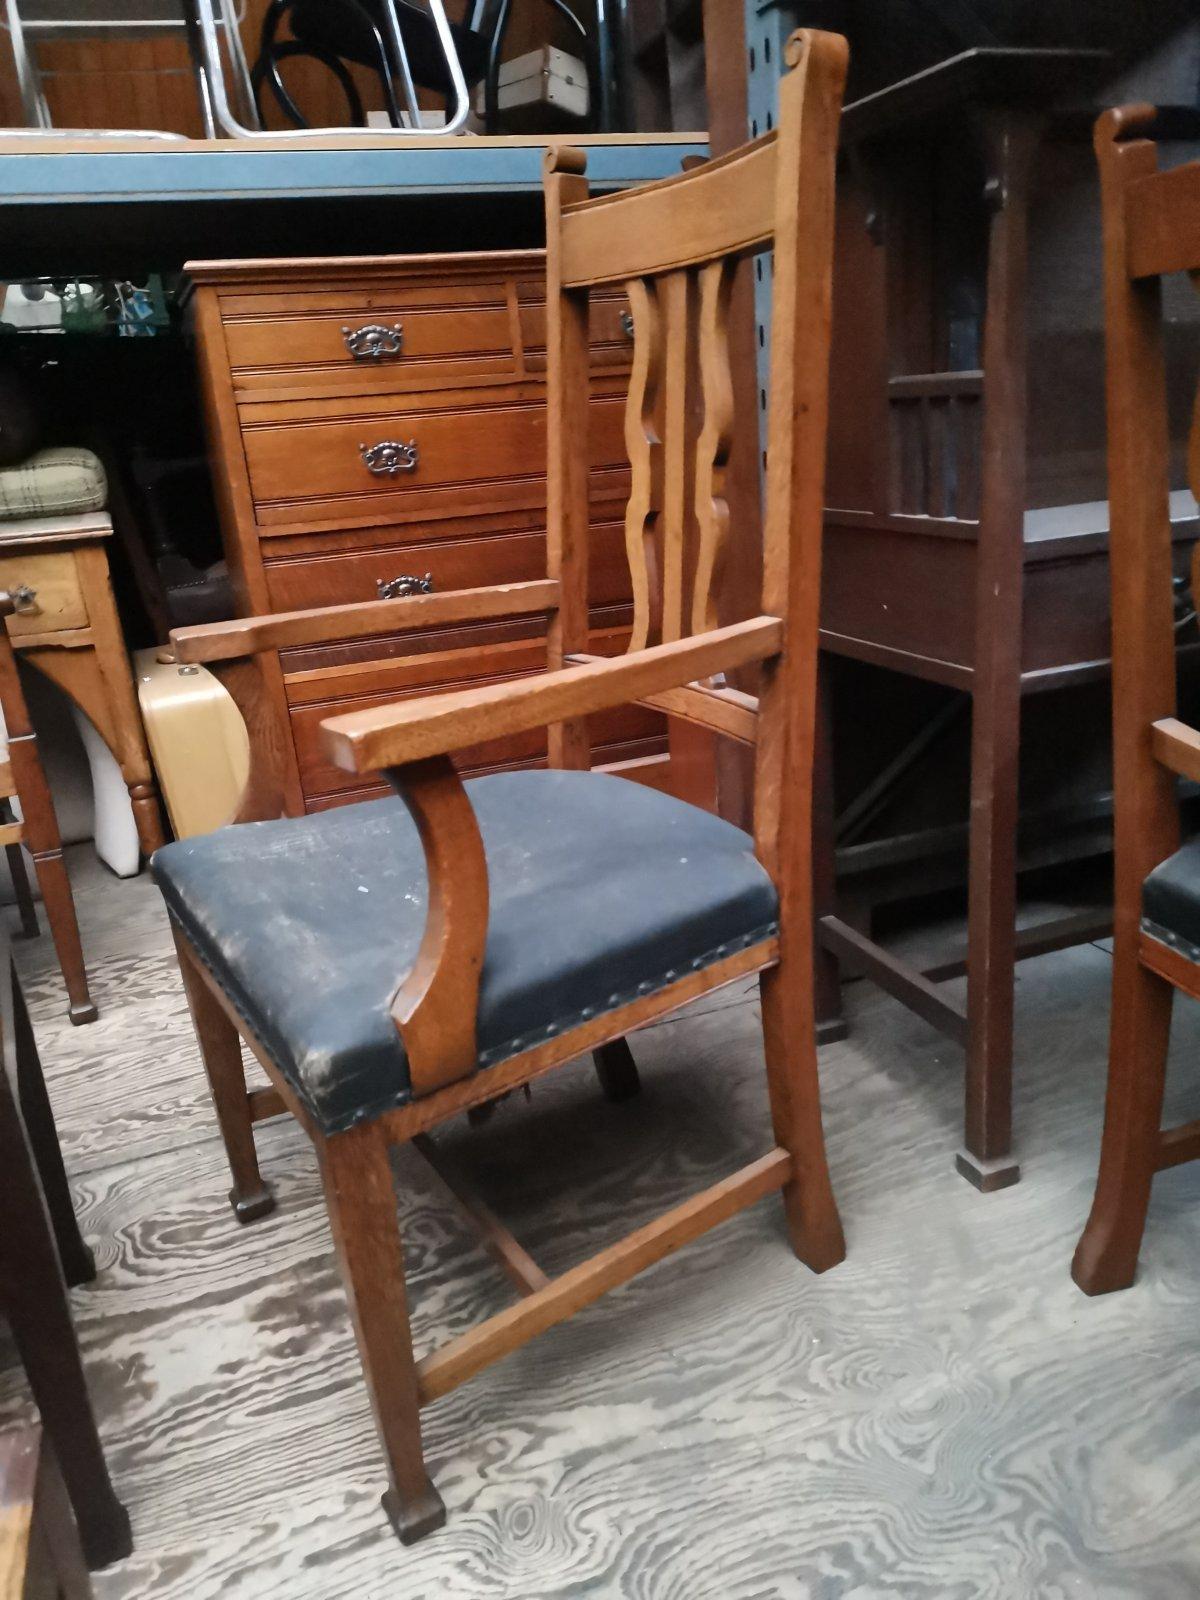 Wylie And Lochhead of Glasgow Scotland.
A good quality solid set of five English Arts & Crafts oak dining chairs consisting of one armchair and four single dining chairs.
Illustrated in the Wylie and Lochhead catalog of 1901. Last two